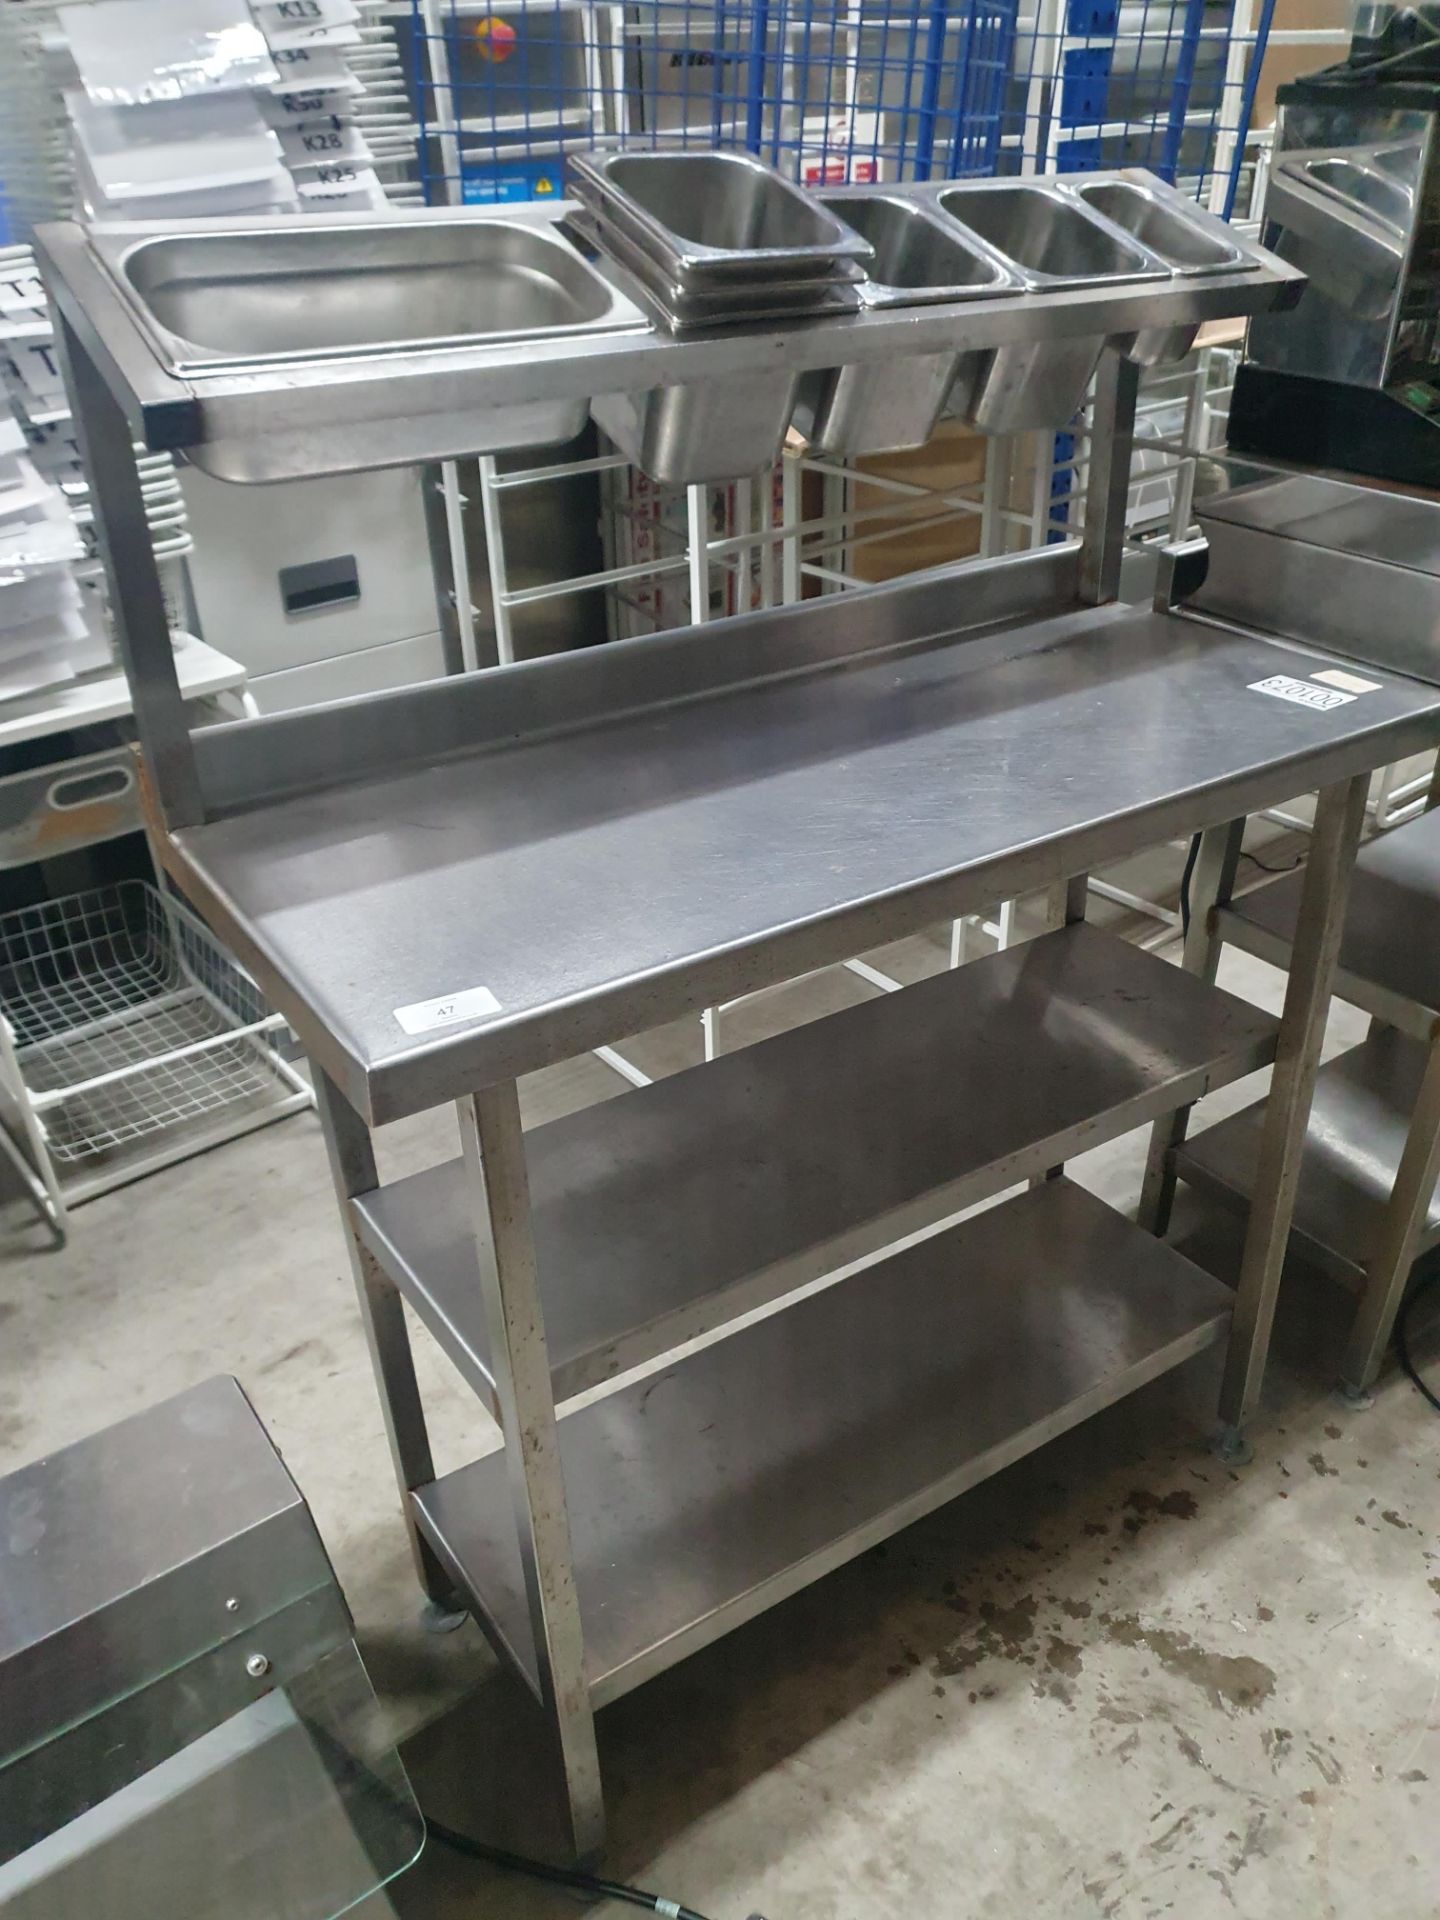 Stainless Steel Prep Table With Gastro Shelf - Image 2 of 2